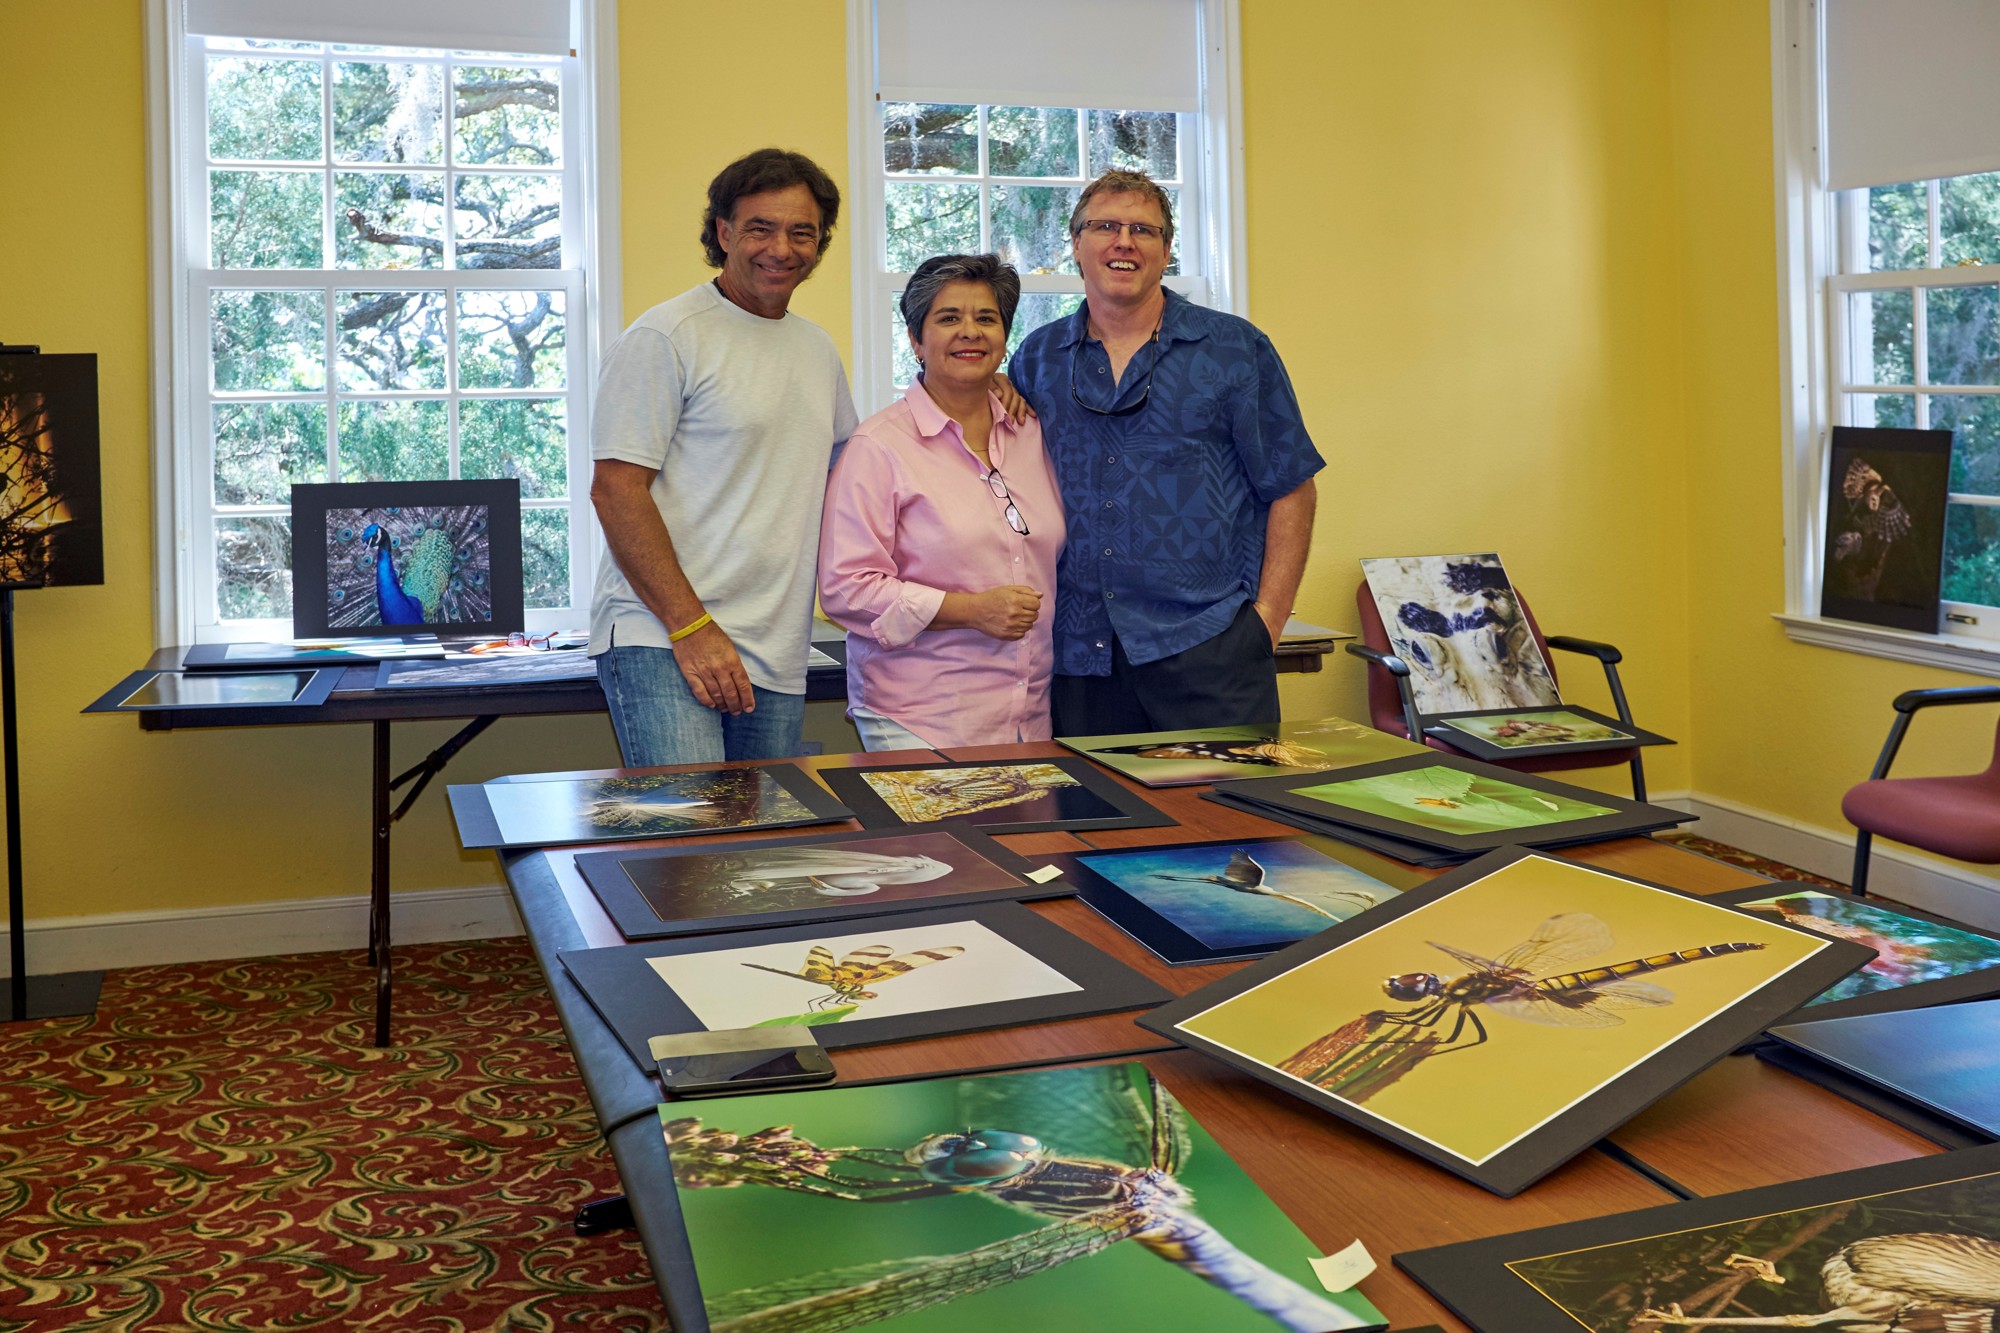 The judging panel of this year's photo exhibition included professional photographers Perry Johnson, Maria Lyle and Steve Stennes.